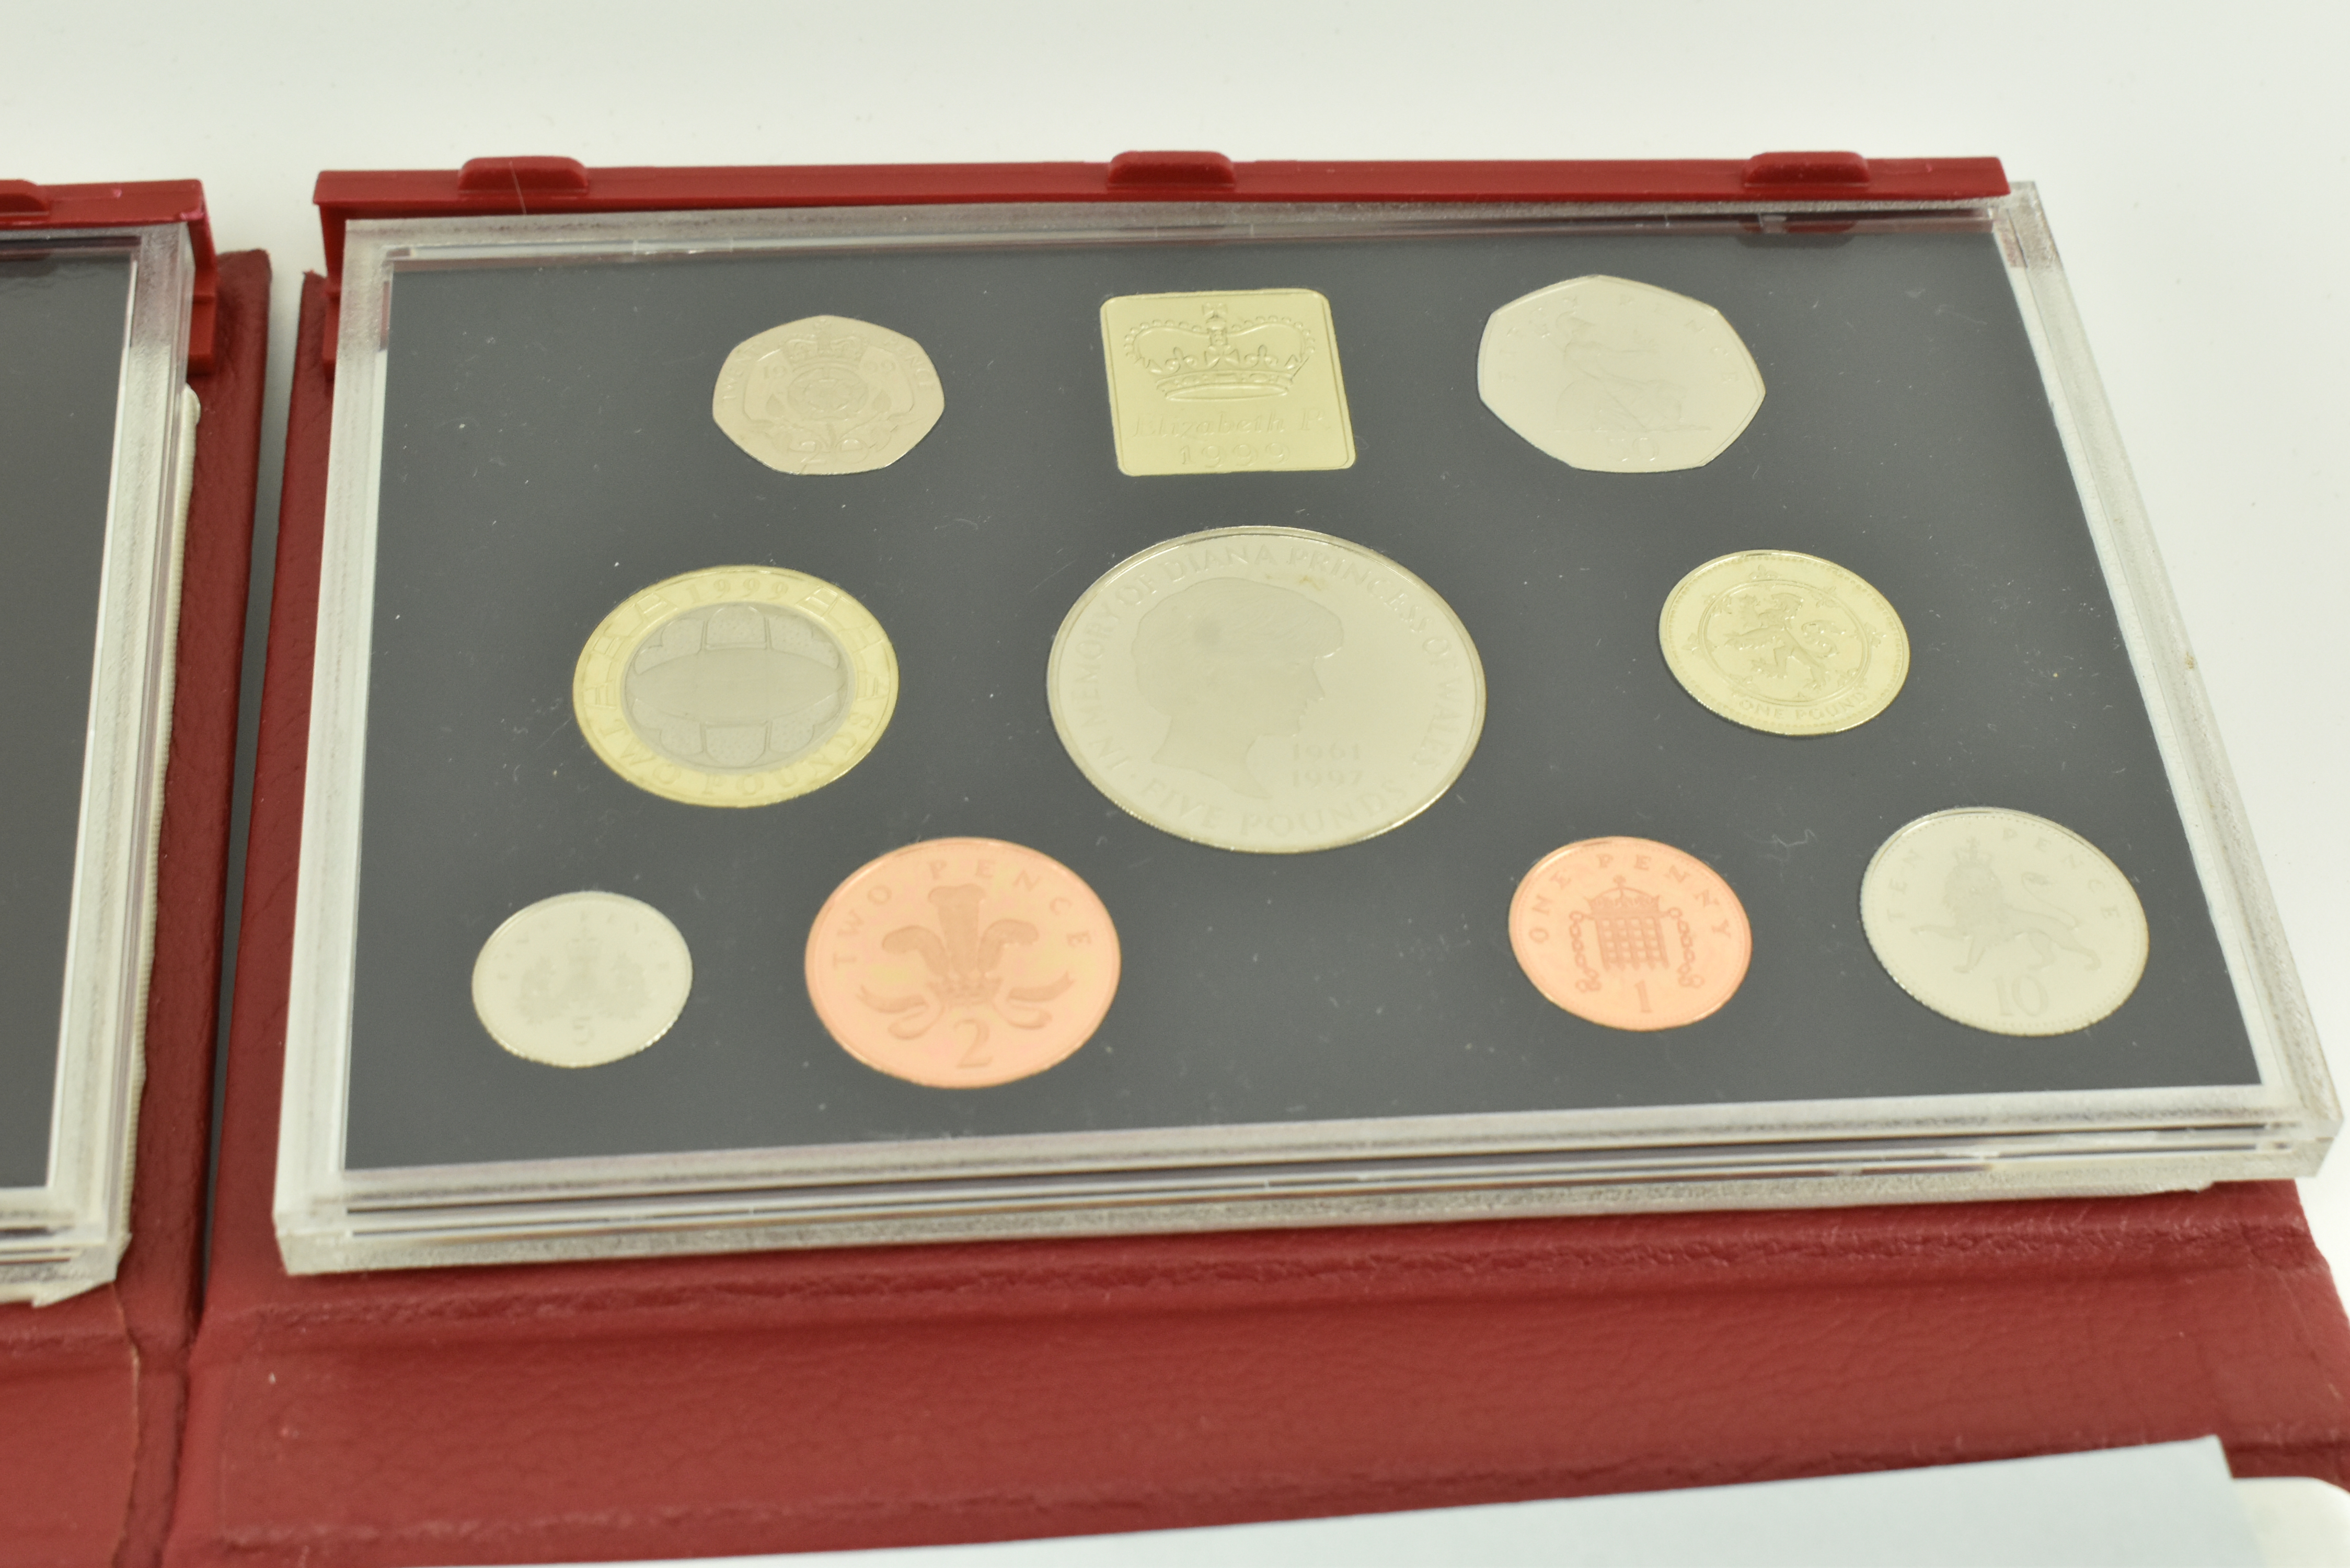 SIX UNITED KINGDOM DELUXE COIN PROOF SETS, 1999-2004 - Image 7 of 8